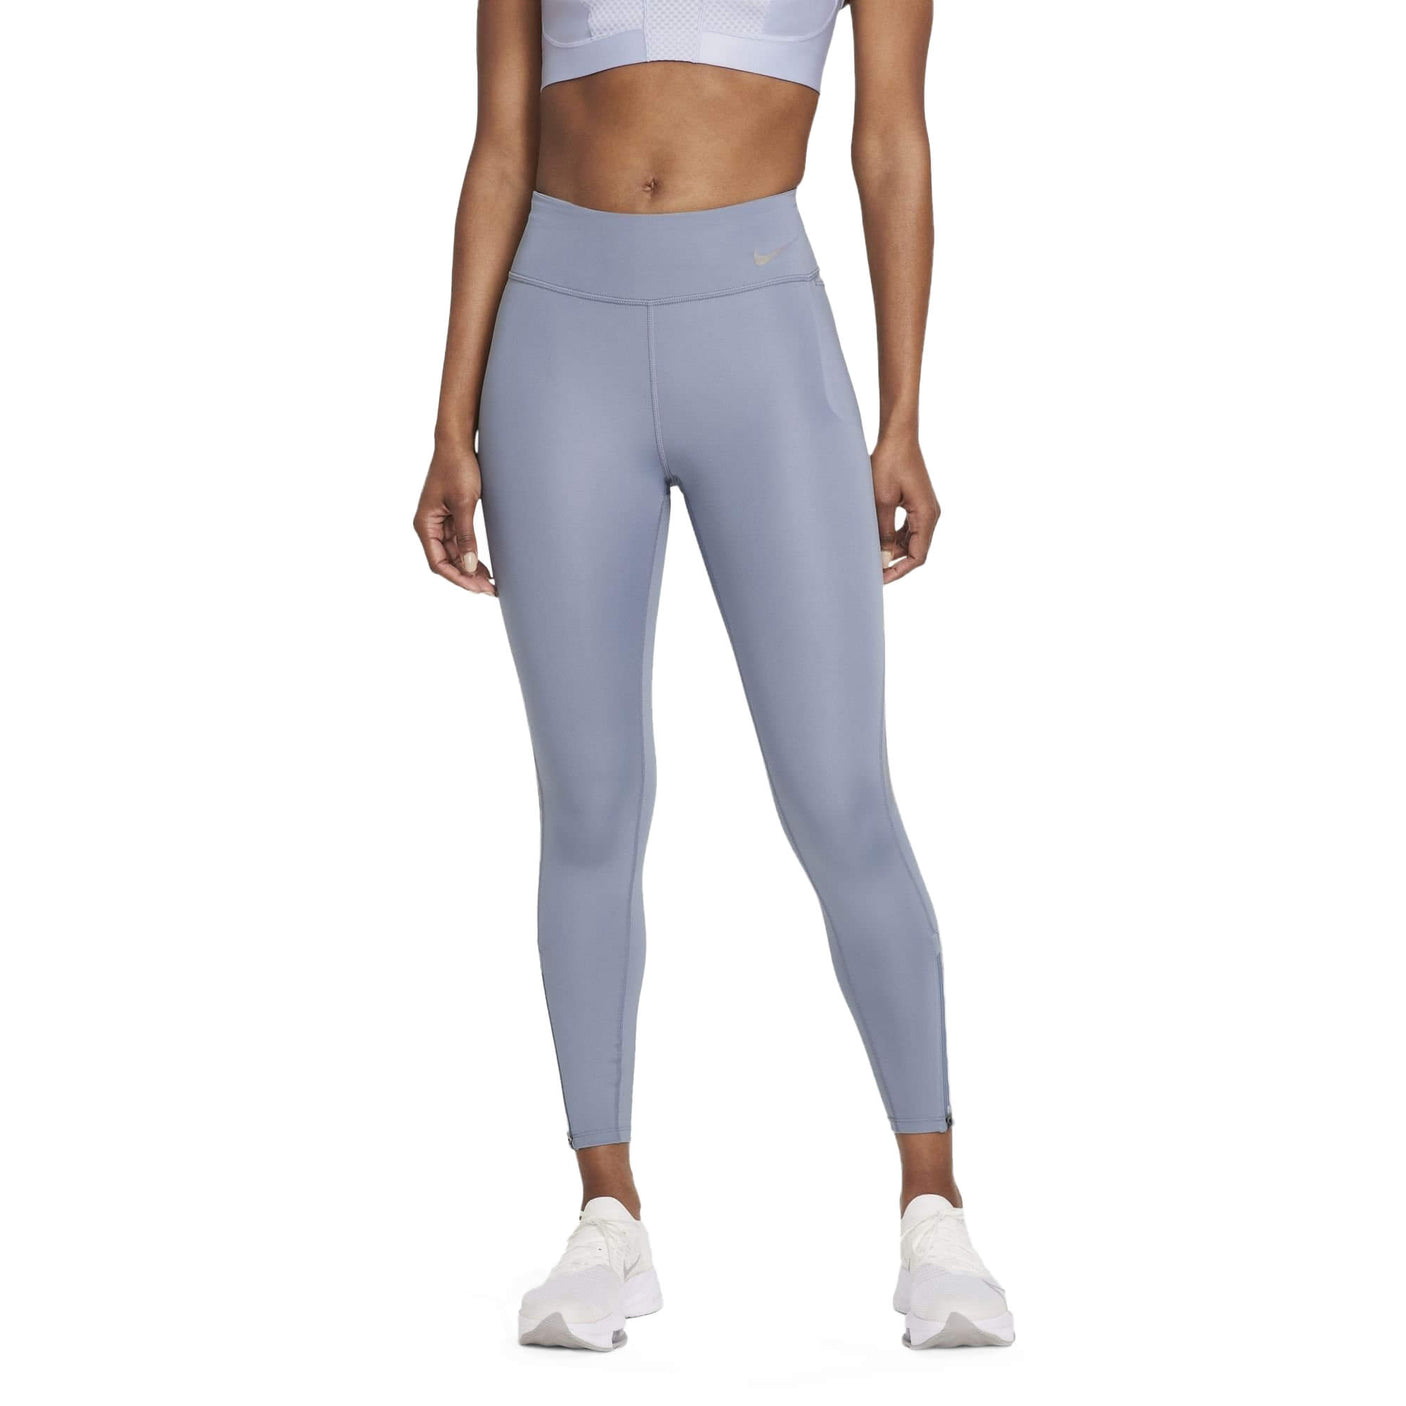 Nike / Women's One Tights